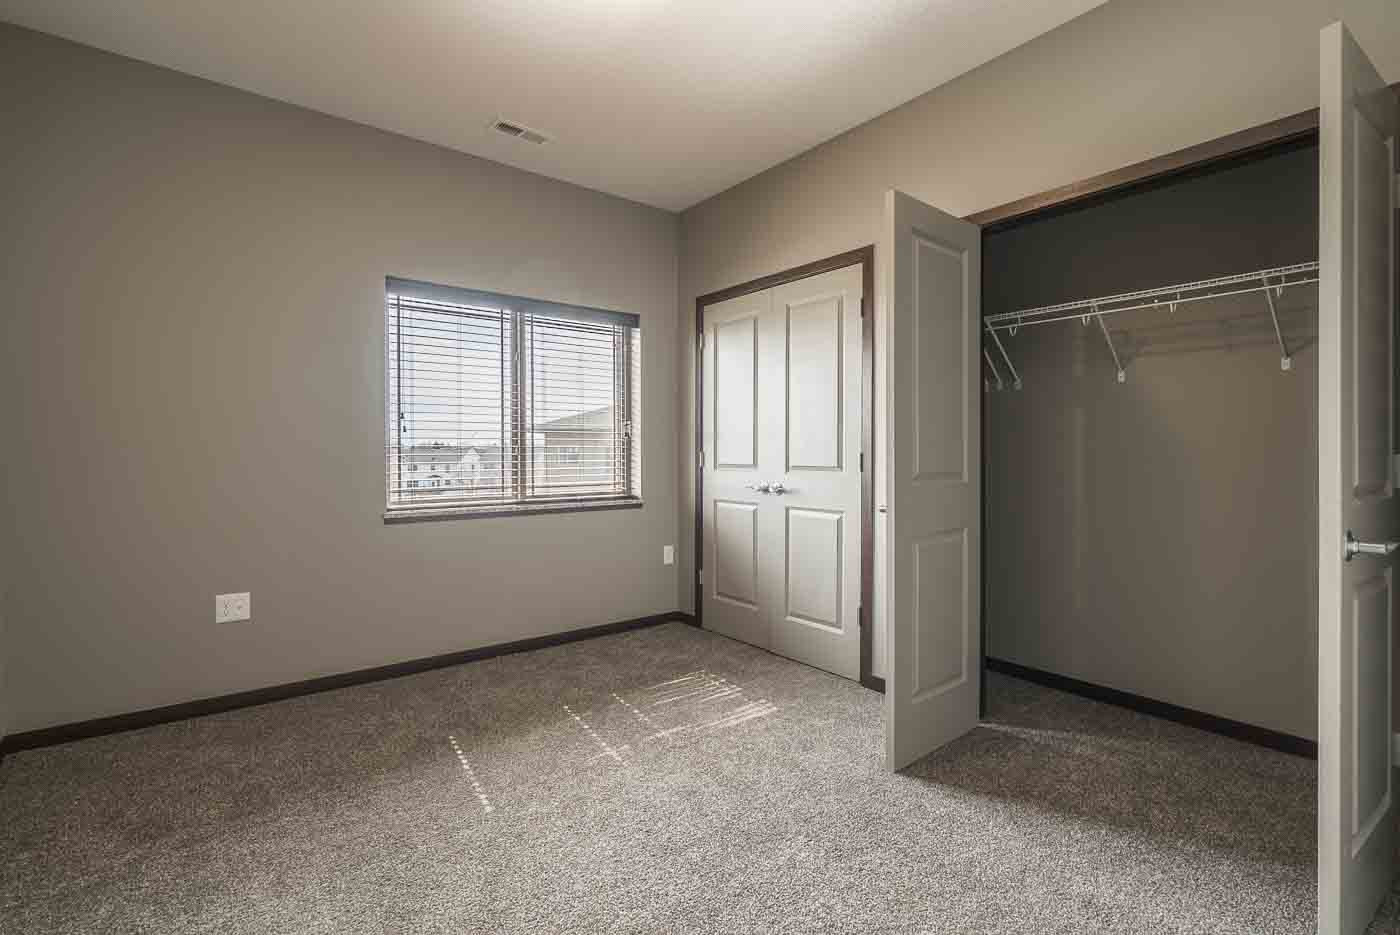 12 Great Hardwood Flooring Des Moines 2024 free download hardwood flooring des moines of studio one two three bedroom apartments rent 360 at jordan west intended for picasso c3 floor plan 360 at jordan west new luxury apartments in des moines